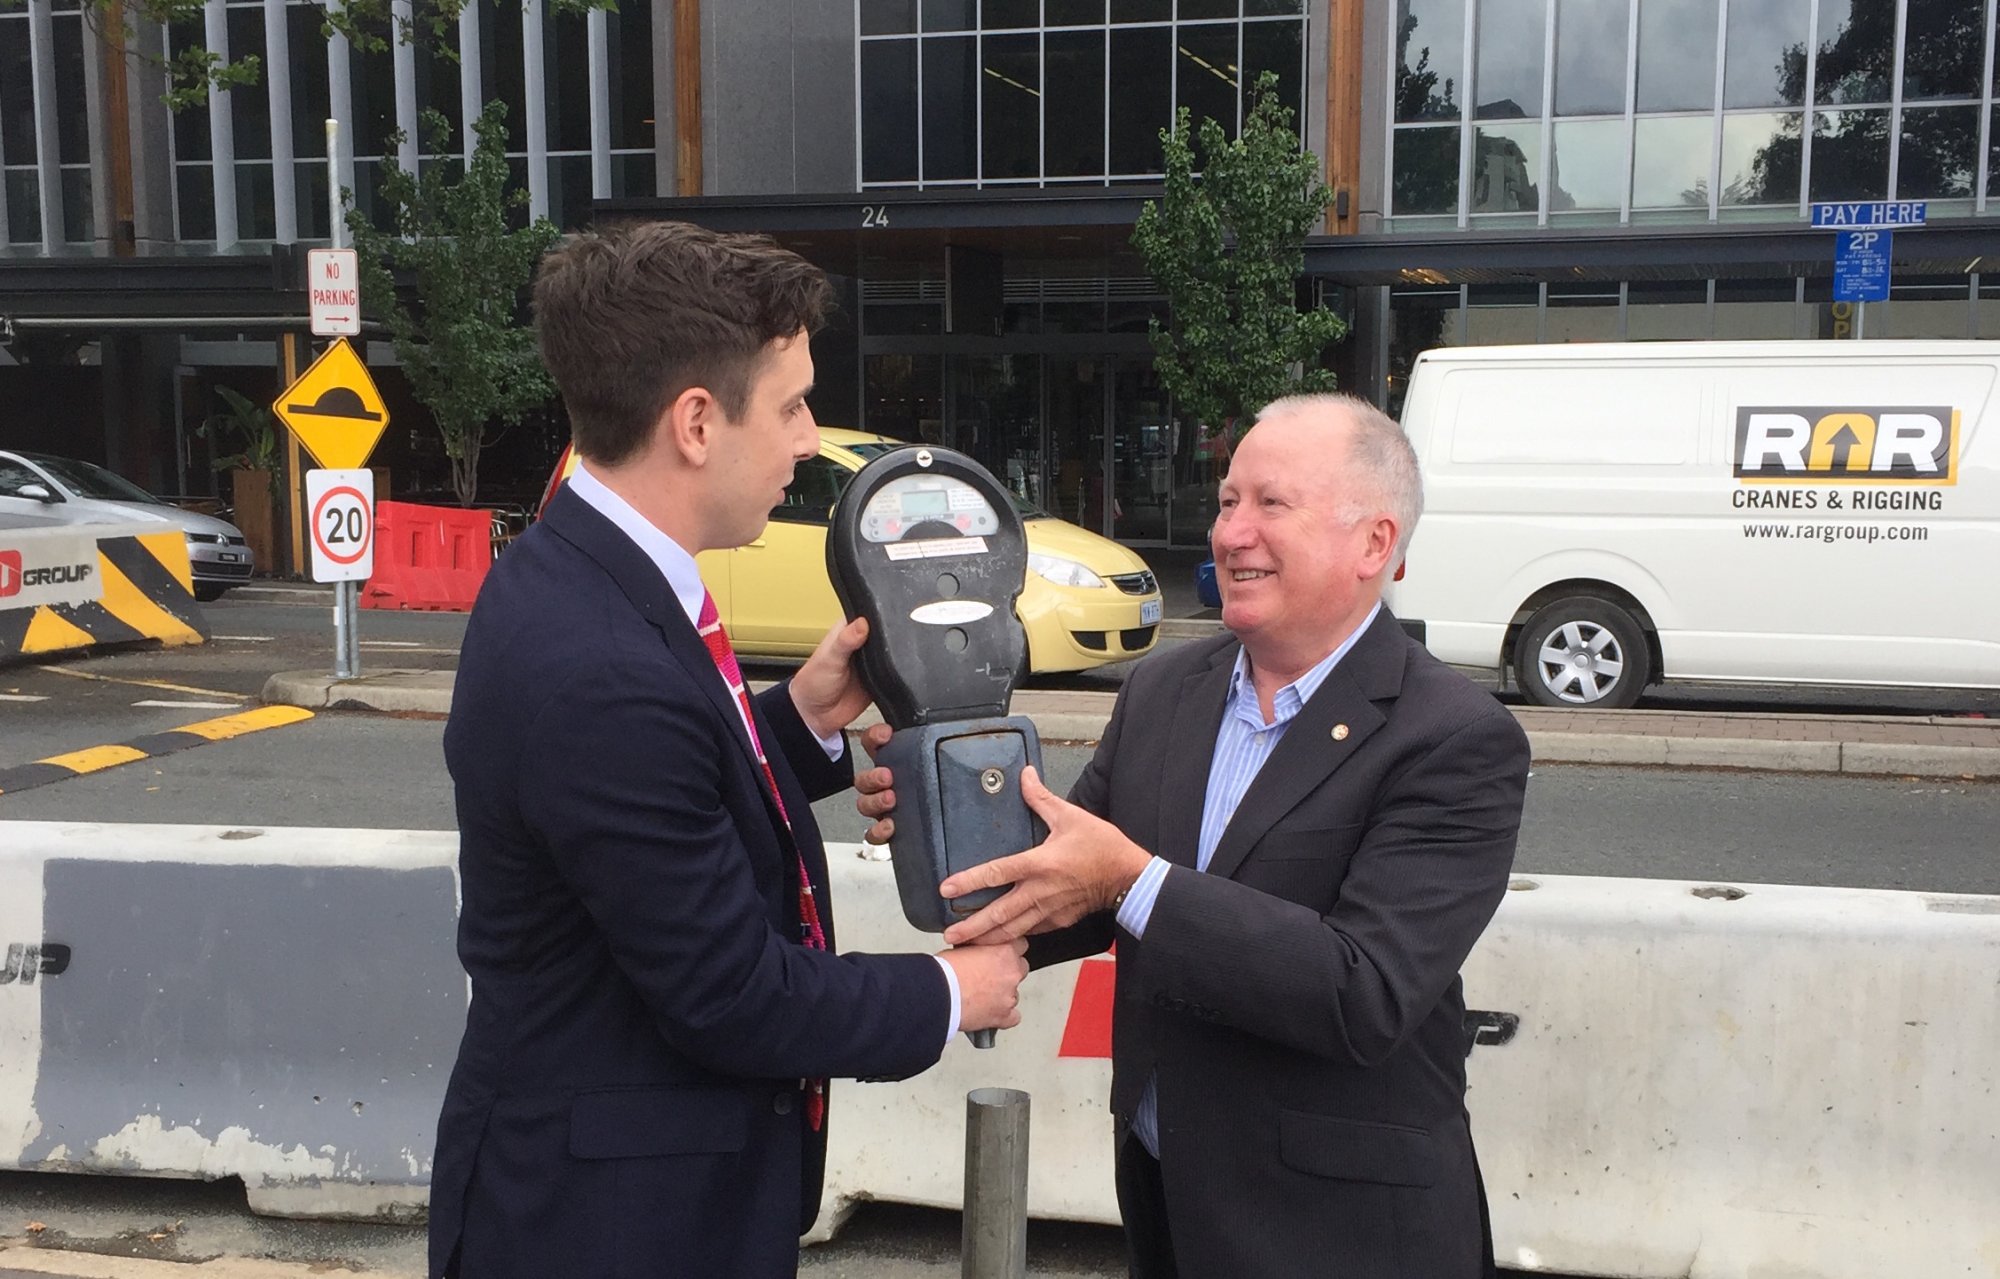 Farewell party for Canberra's last parking meter